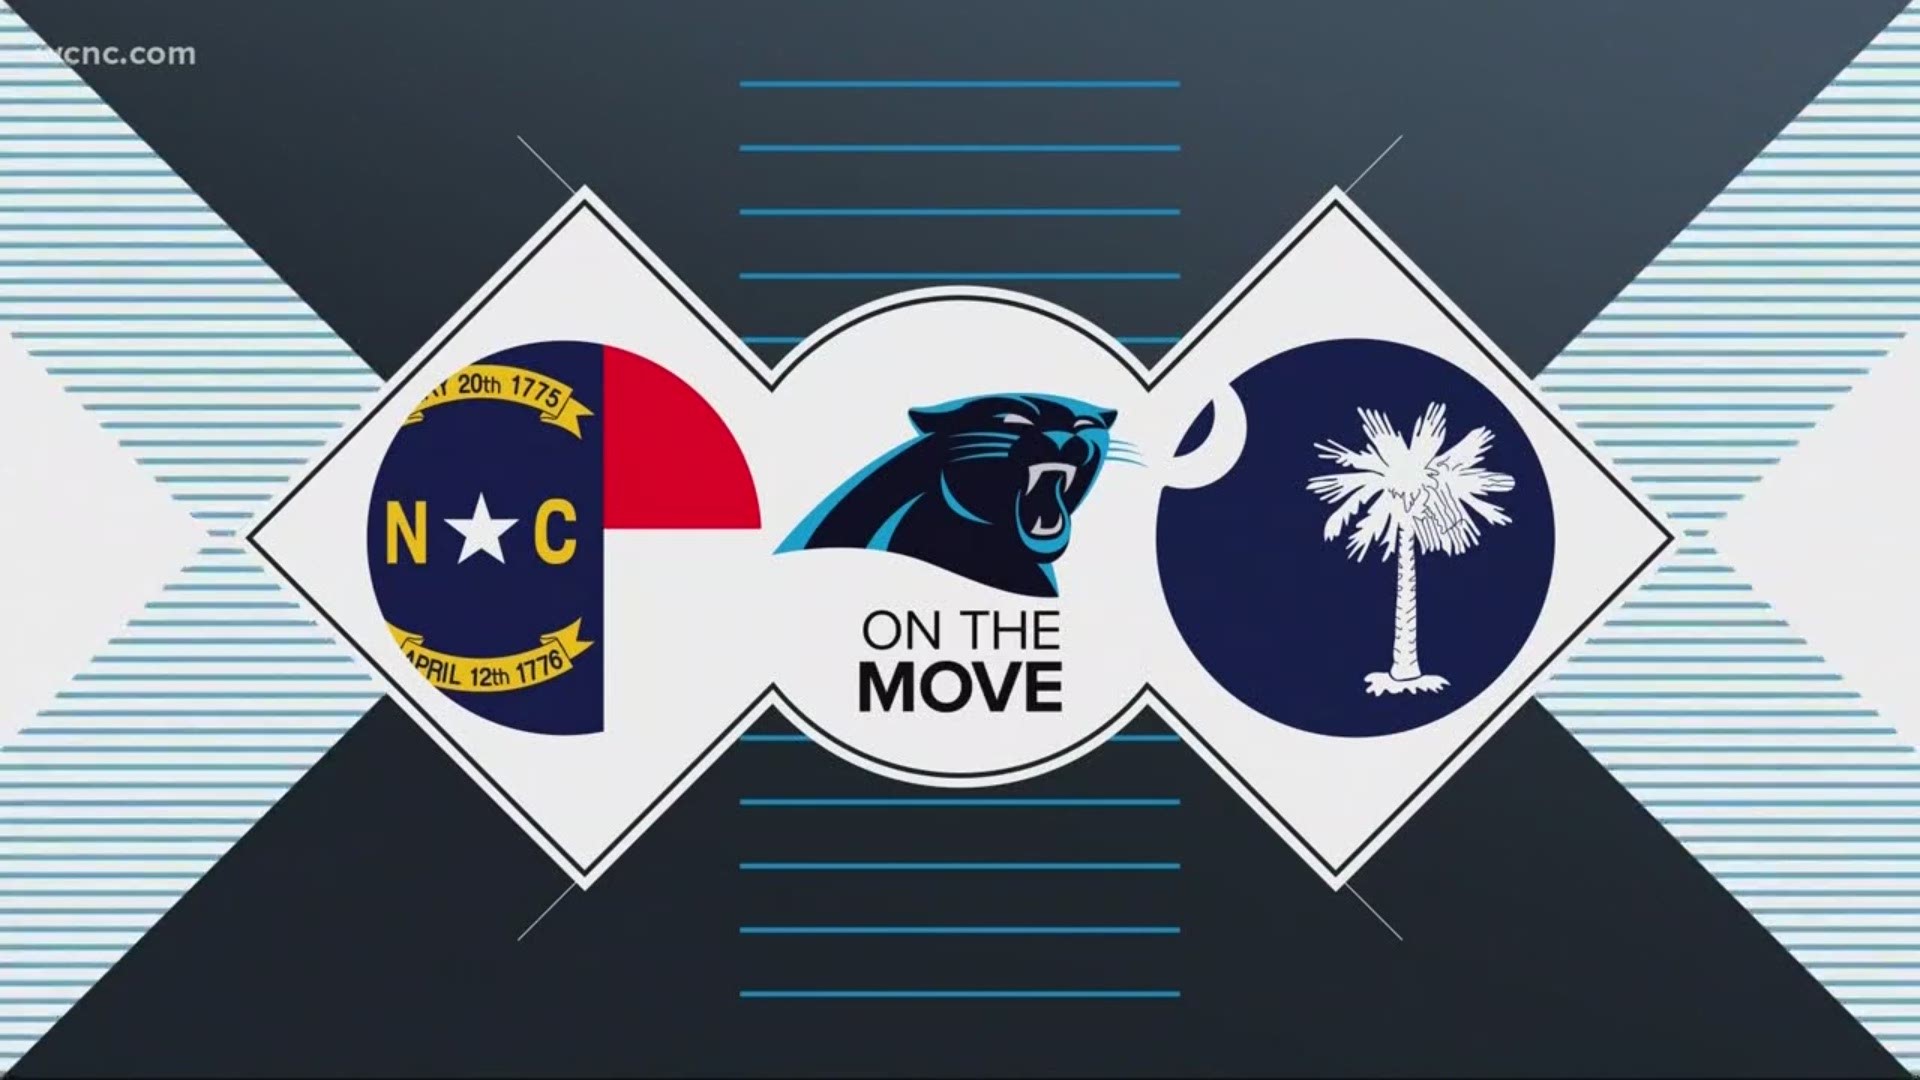 McMaster said a Panthers move for a practice facility in York County would be a step to bring the two Carolinas closer together.